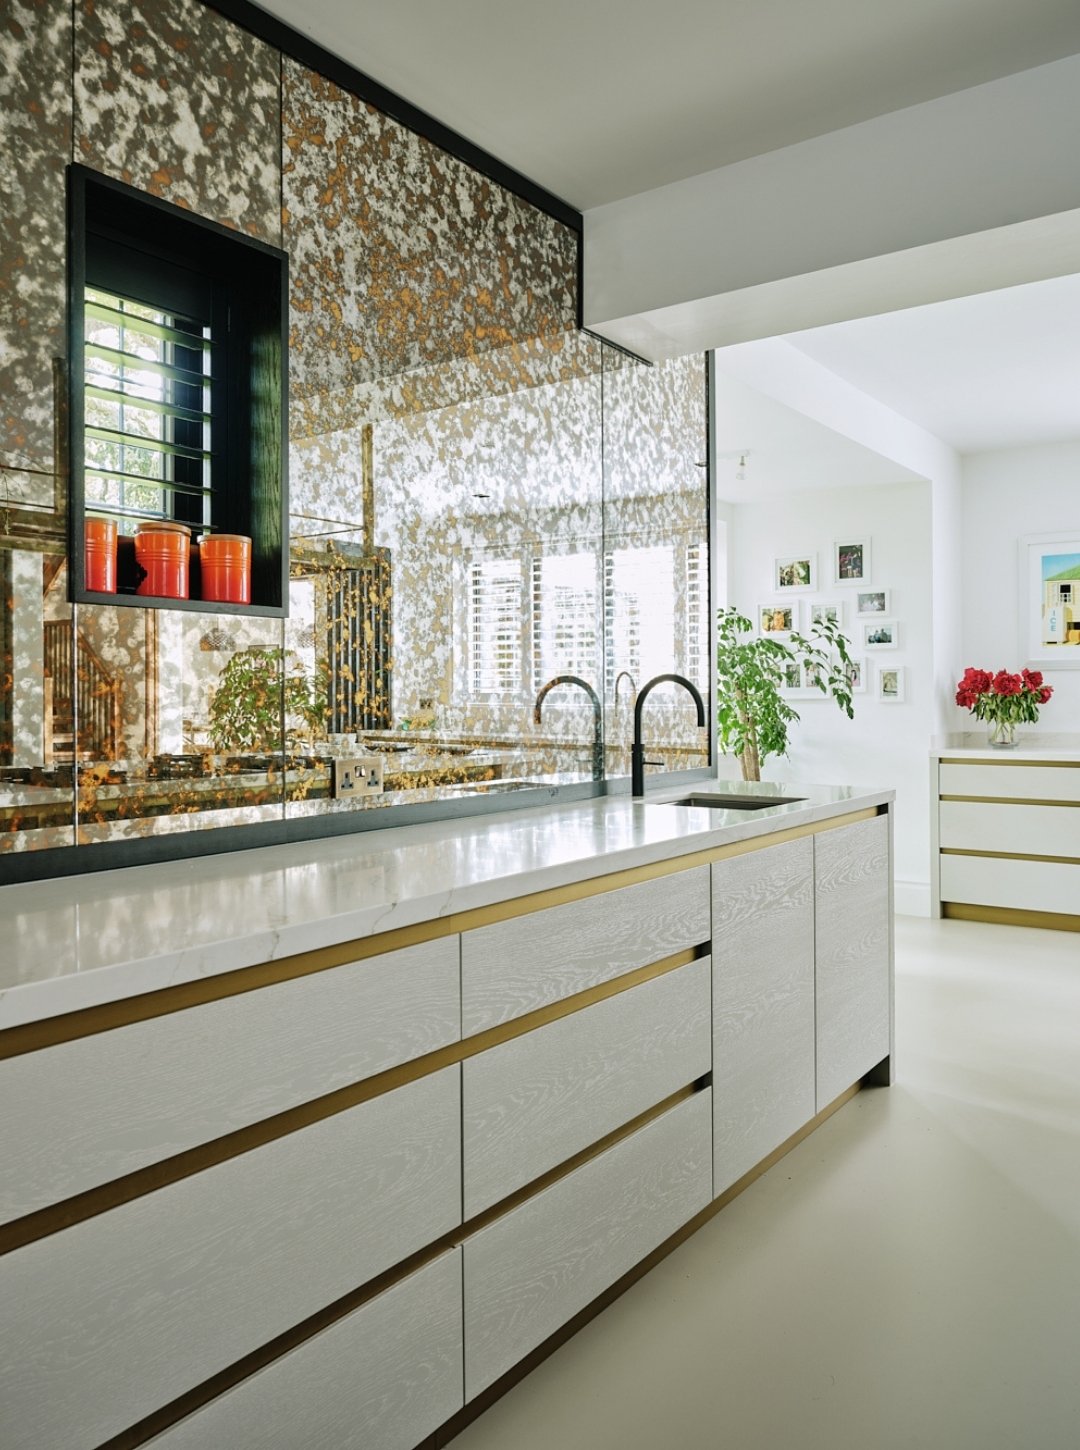 kitchen design, Charlie Smallbone’s Kitchen Mixes and Matches Materials to Beautiful Effect